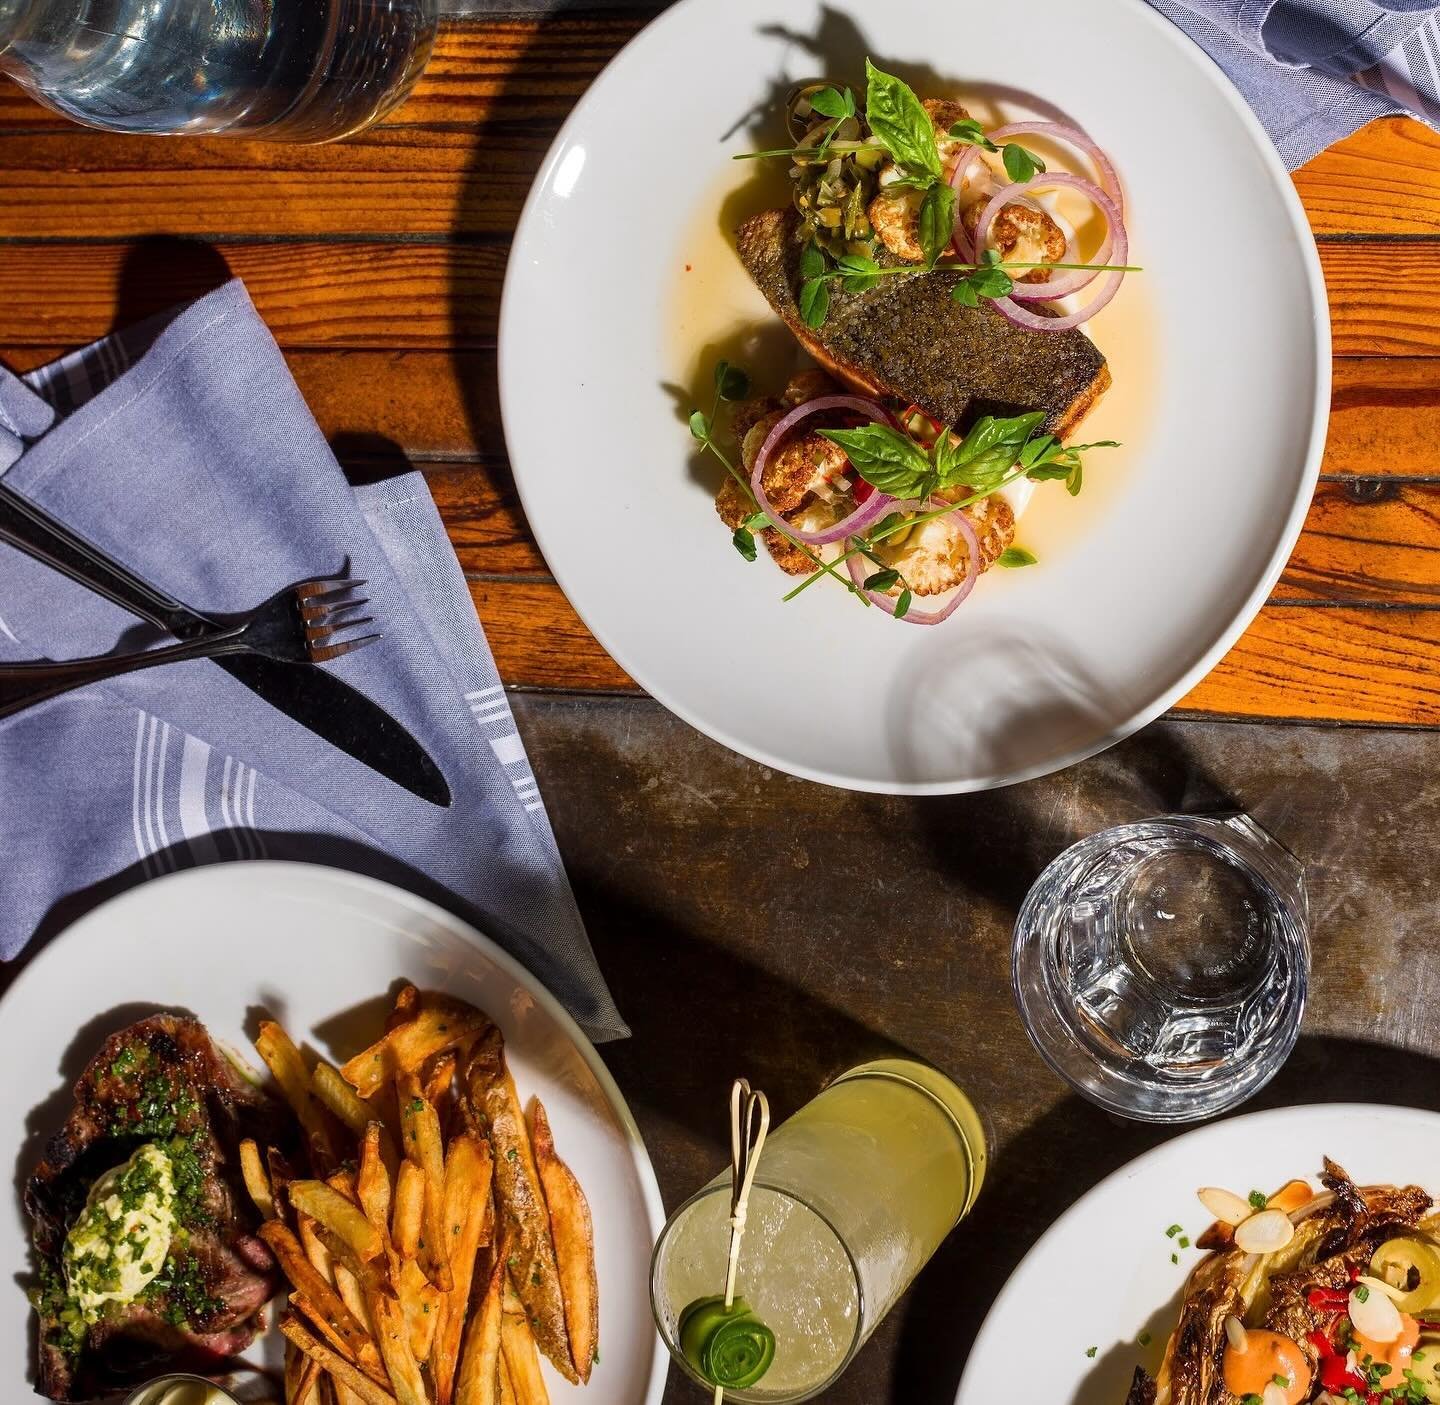 we don&rsquo;t just have delicious pasta. try some of our secondi dishes! like our pan roasted salmon or flank steak frites. 🤤🍴

find the perfect pairing on our Tuesday bottle deal list!

#bottledeals #amanoatl